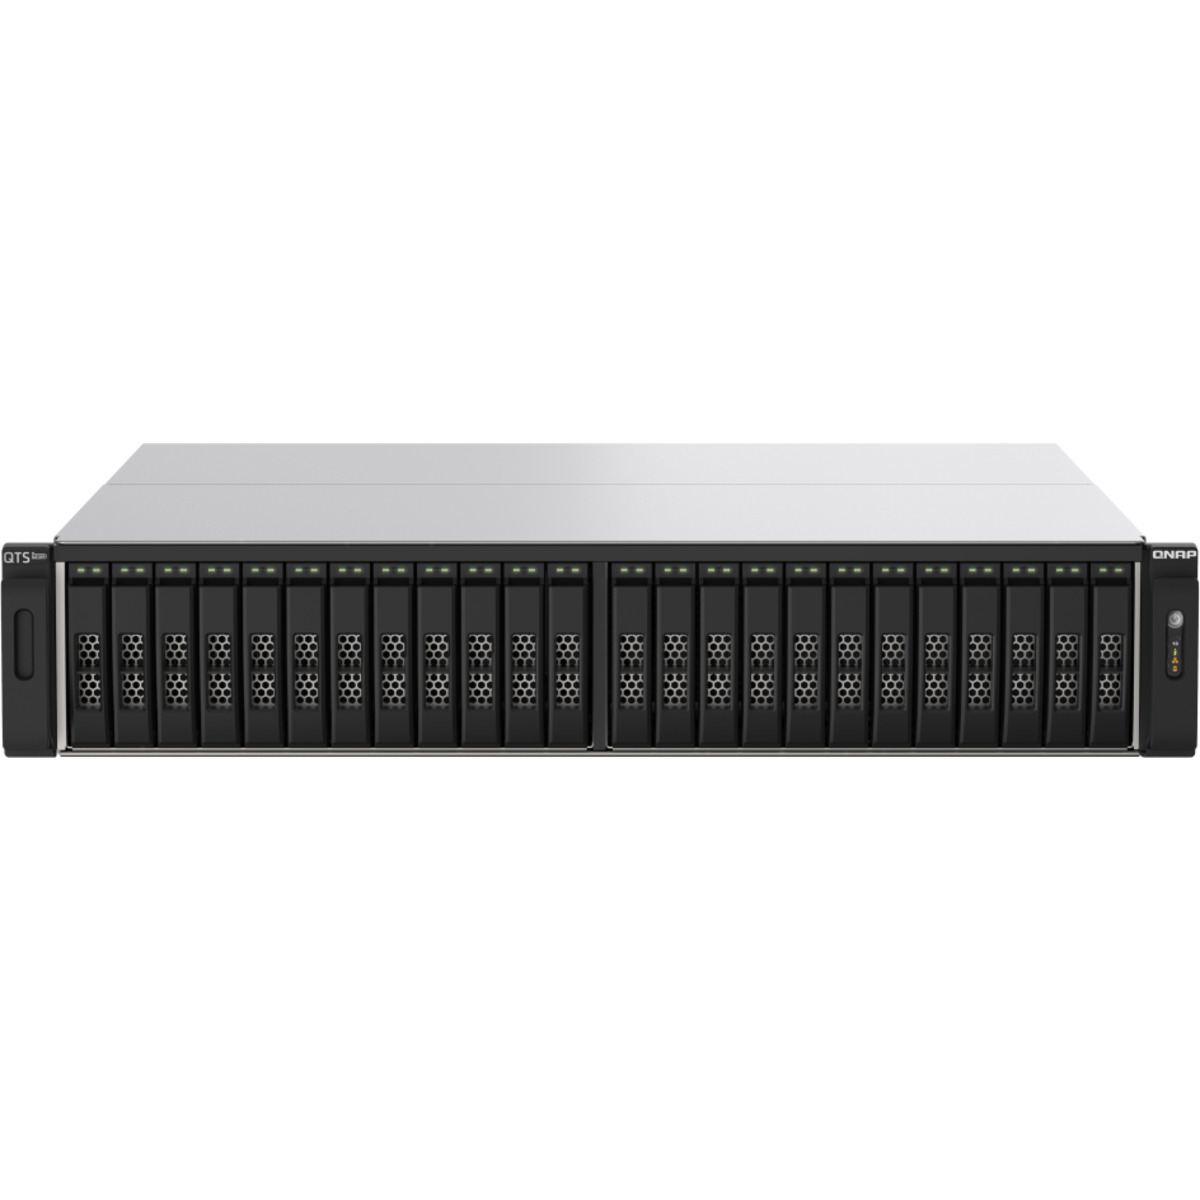 QNAP TS-h2490FU-7232P 12tb 24-Bay RackMount Large Business / Enterprise NAS - Network Attached Storage Device 24x500gb Western Digital Red SN700 WDS500G1R0C  3430/2600MB/s M.2 2280 NVMe SSD NAS Class Drives Installed - Burn-In Tested TS-h2490FU-7232P